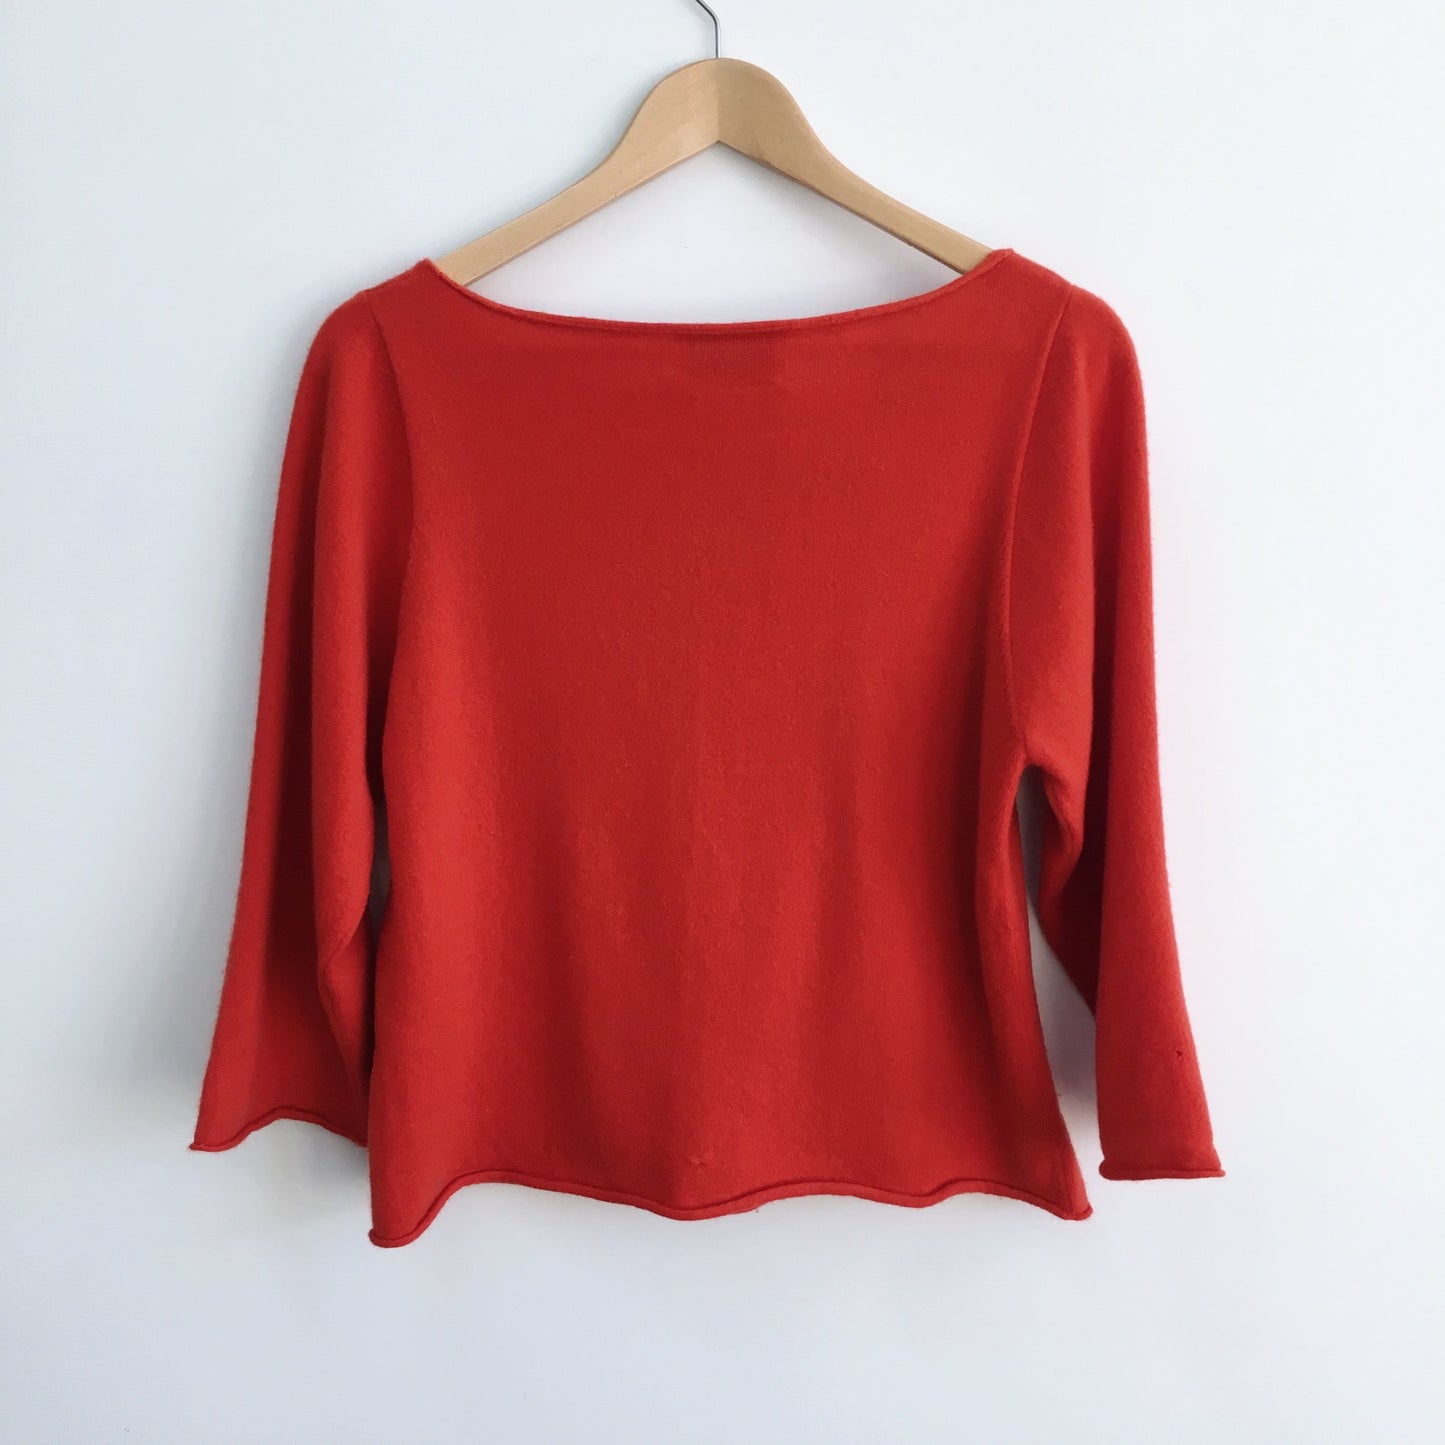 Allude Red Cashmere Sweater - size Small